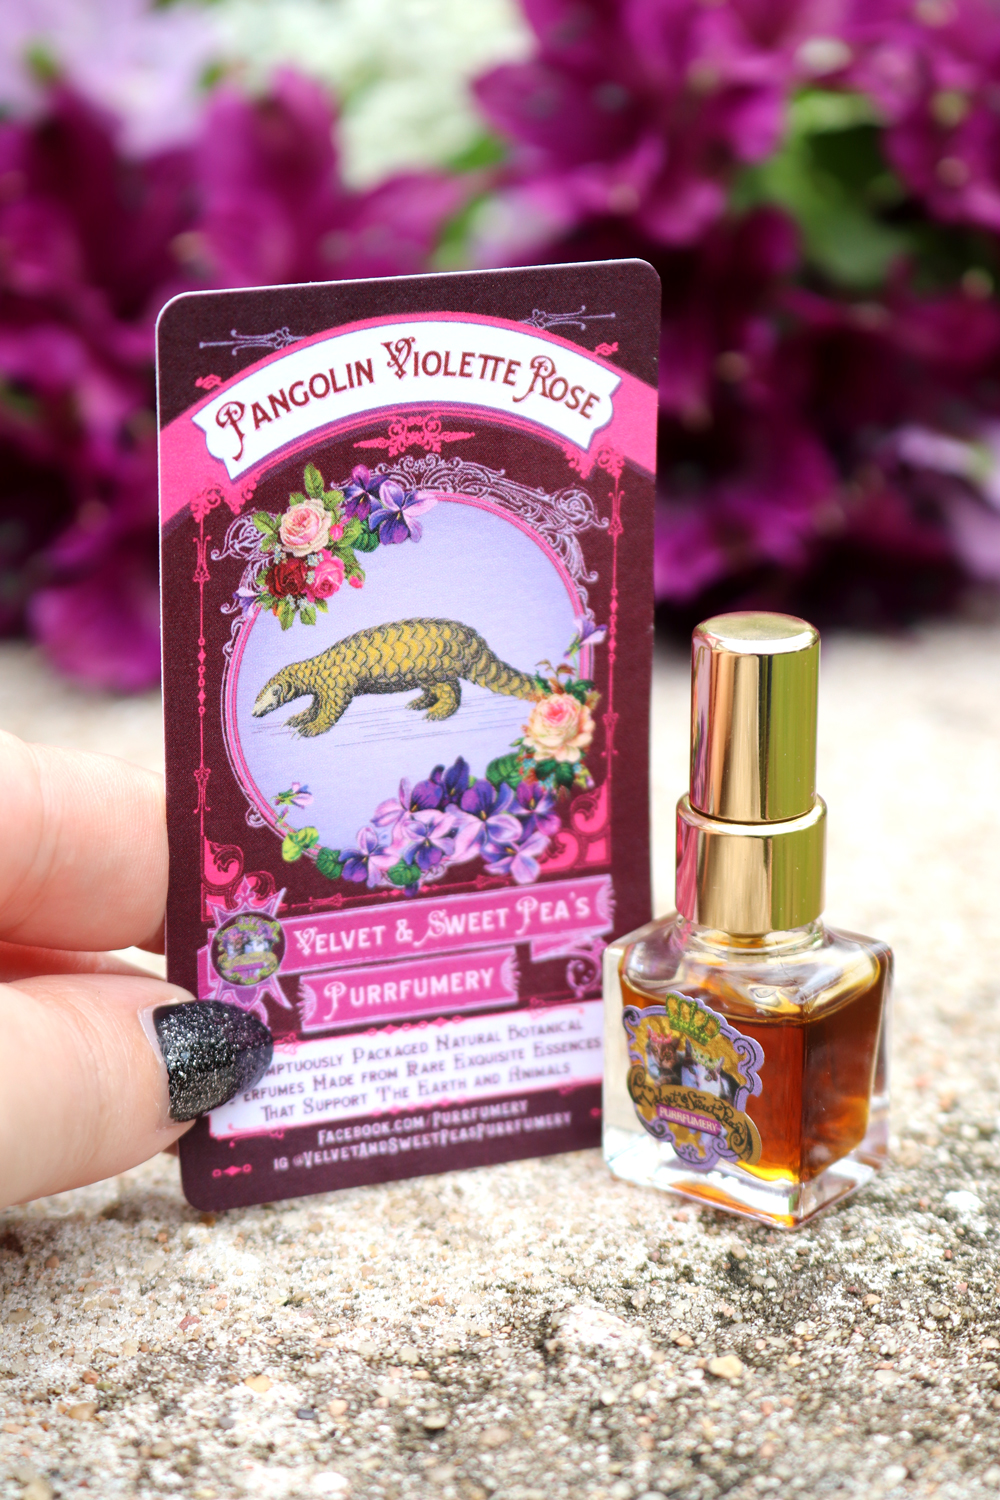 Review of Pangolin Violette Rose Leaping Bunny certified perfume by Velvet and Sweet Pea's Purrfumery